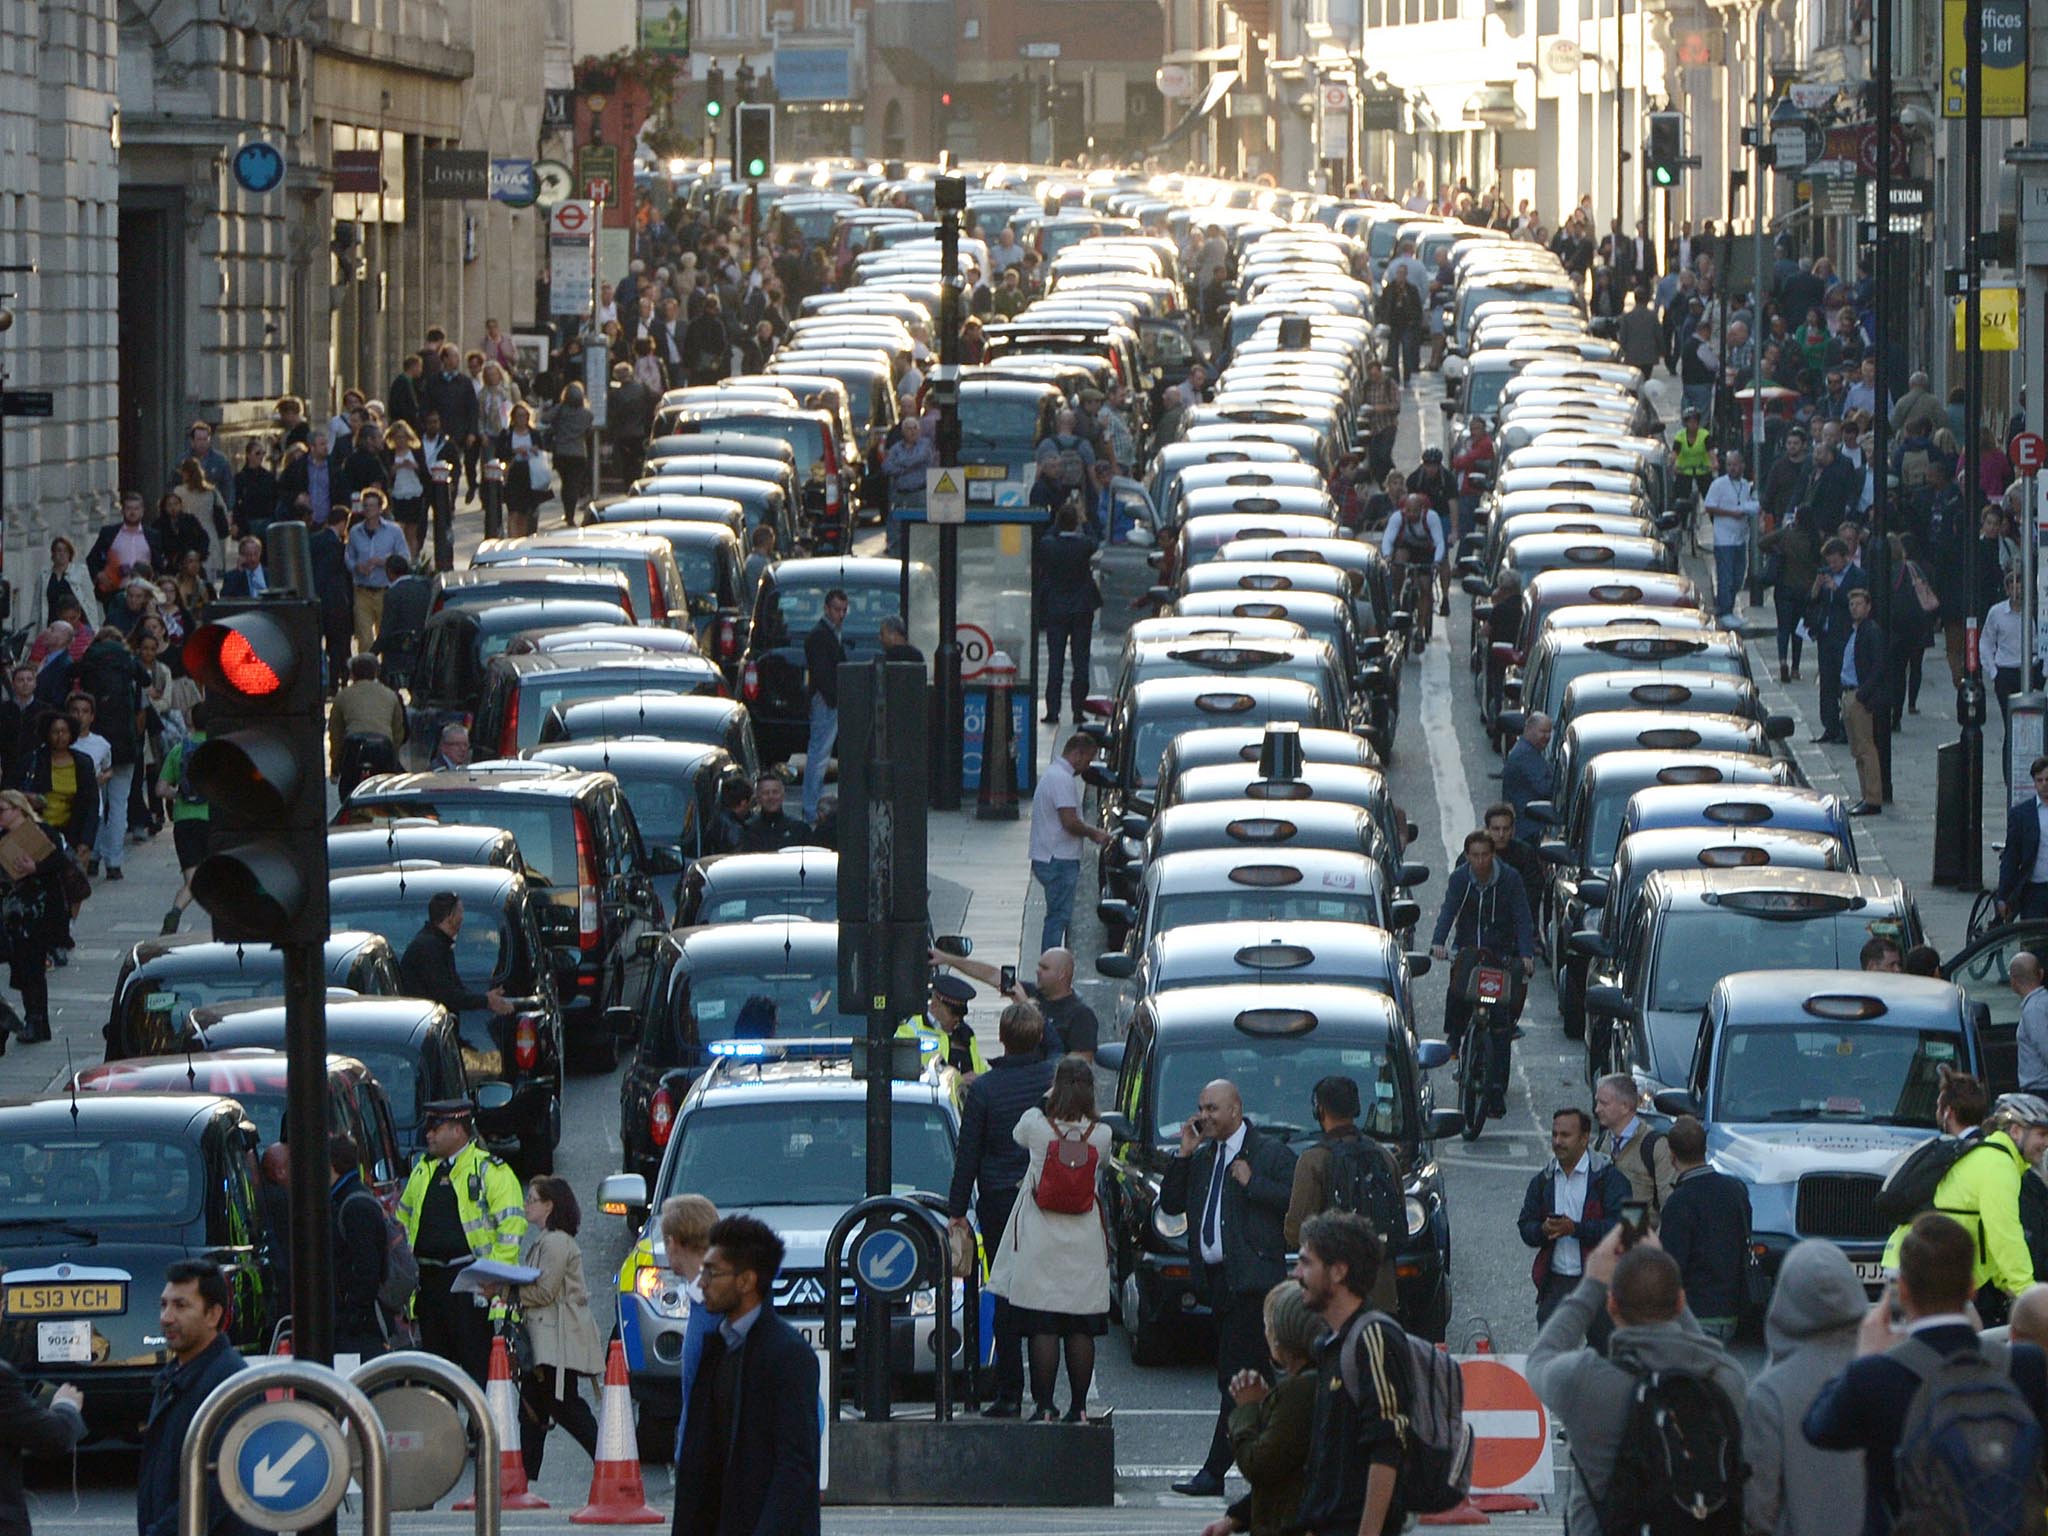 Black cab drivers last year blocked streets in London in a protest against Uber. The smartphone app firm said it would ‘immediately’ appeal the decision by TFL today not to renew its licence.